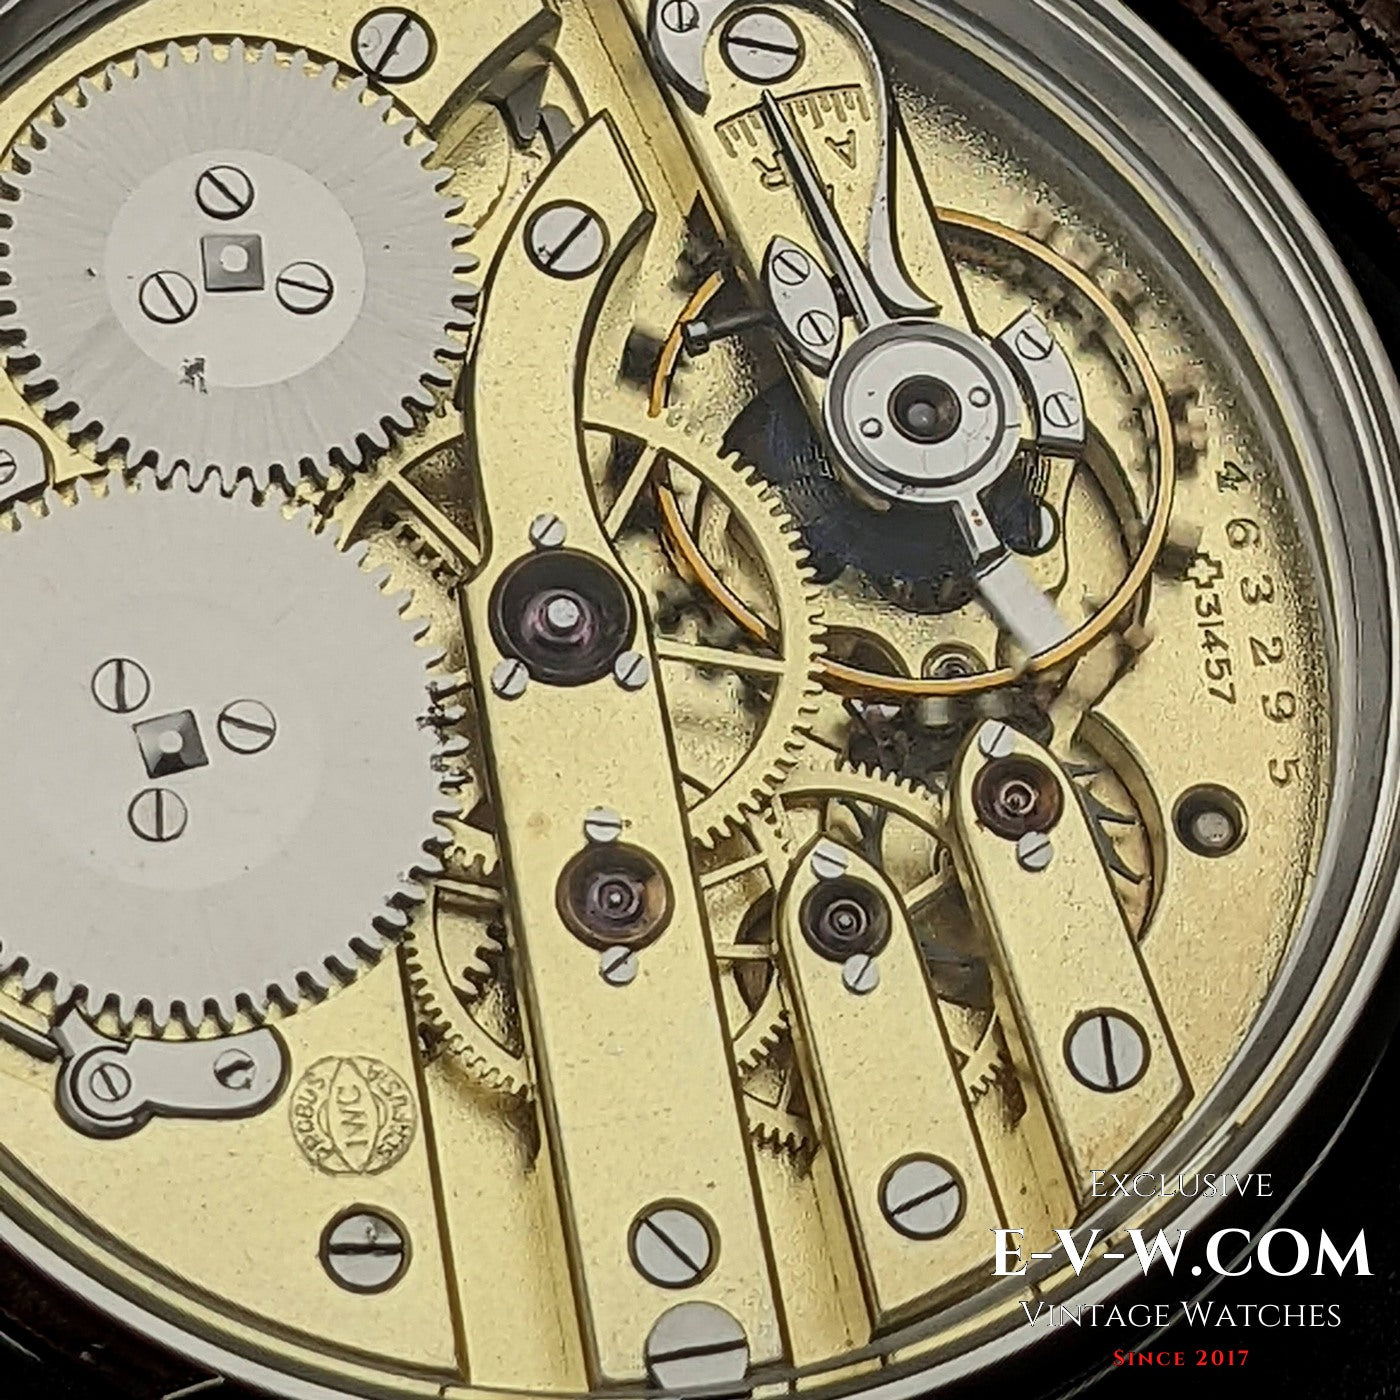 IWC Schaffhausen Movment Antique 1909 - Very Rare Pocket Watch Movement  - only 3600 pcs was made - Rare Cal. 66 Marriage Watch